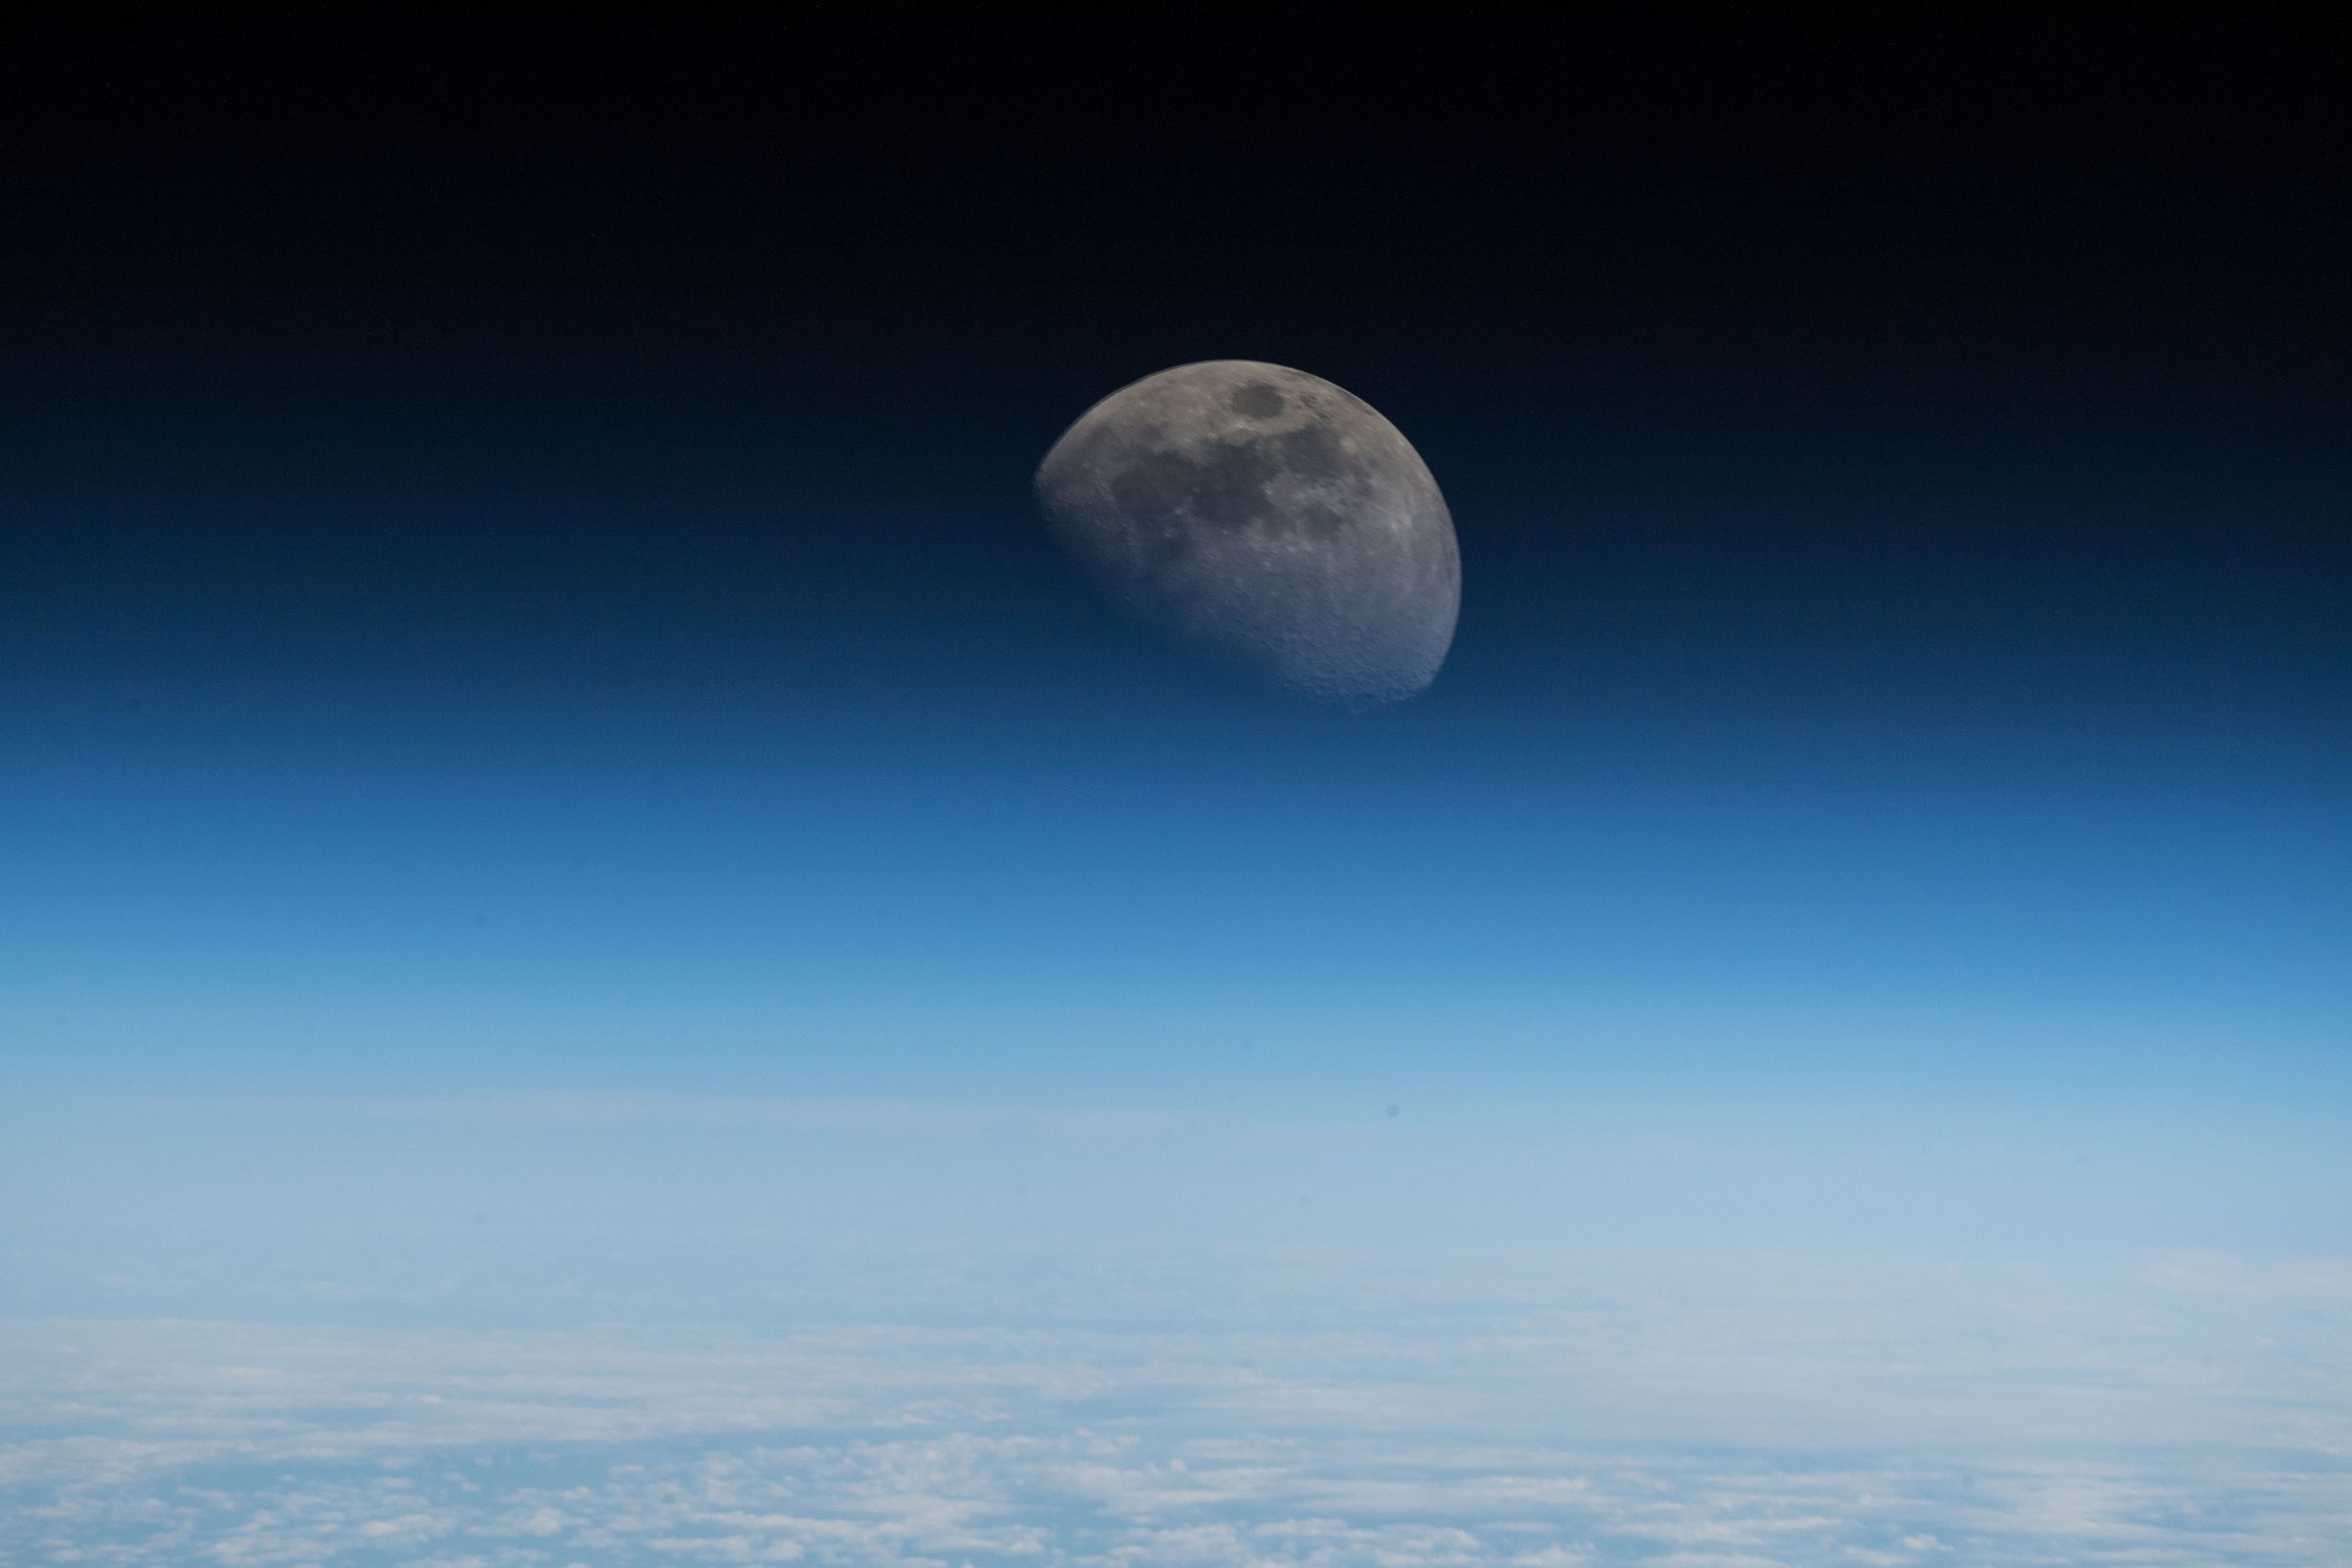 A view of the Moon from the International Space Station